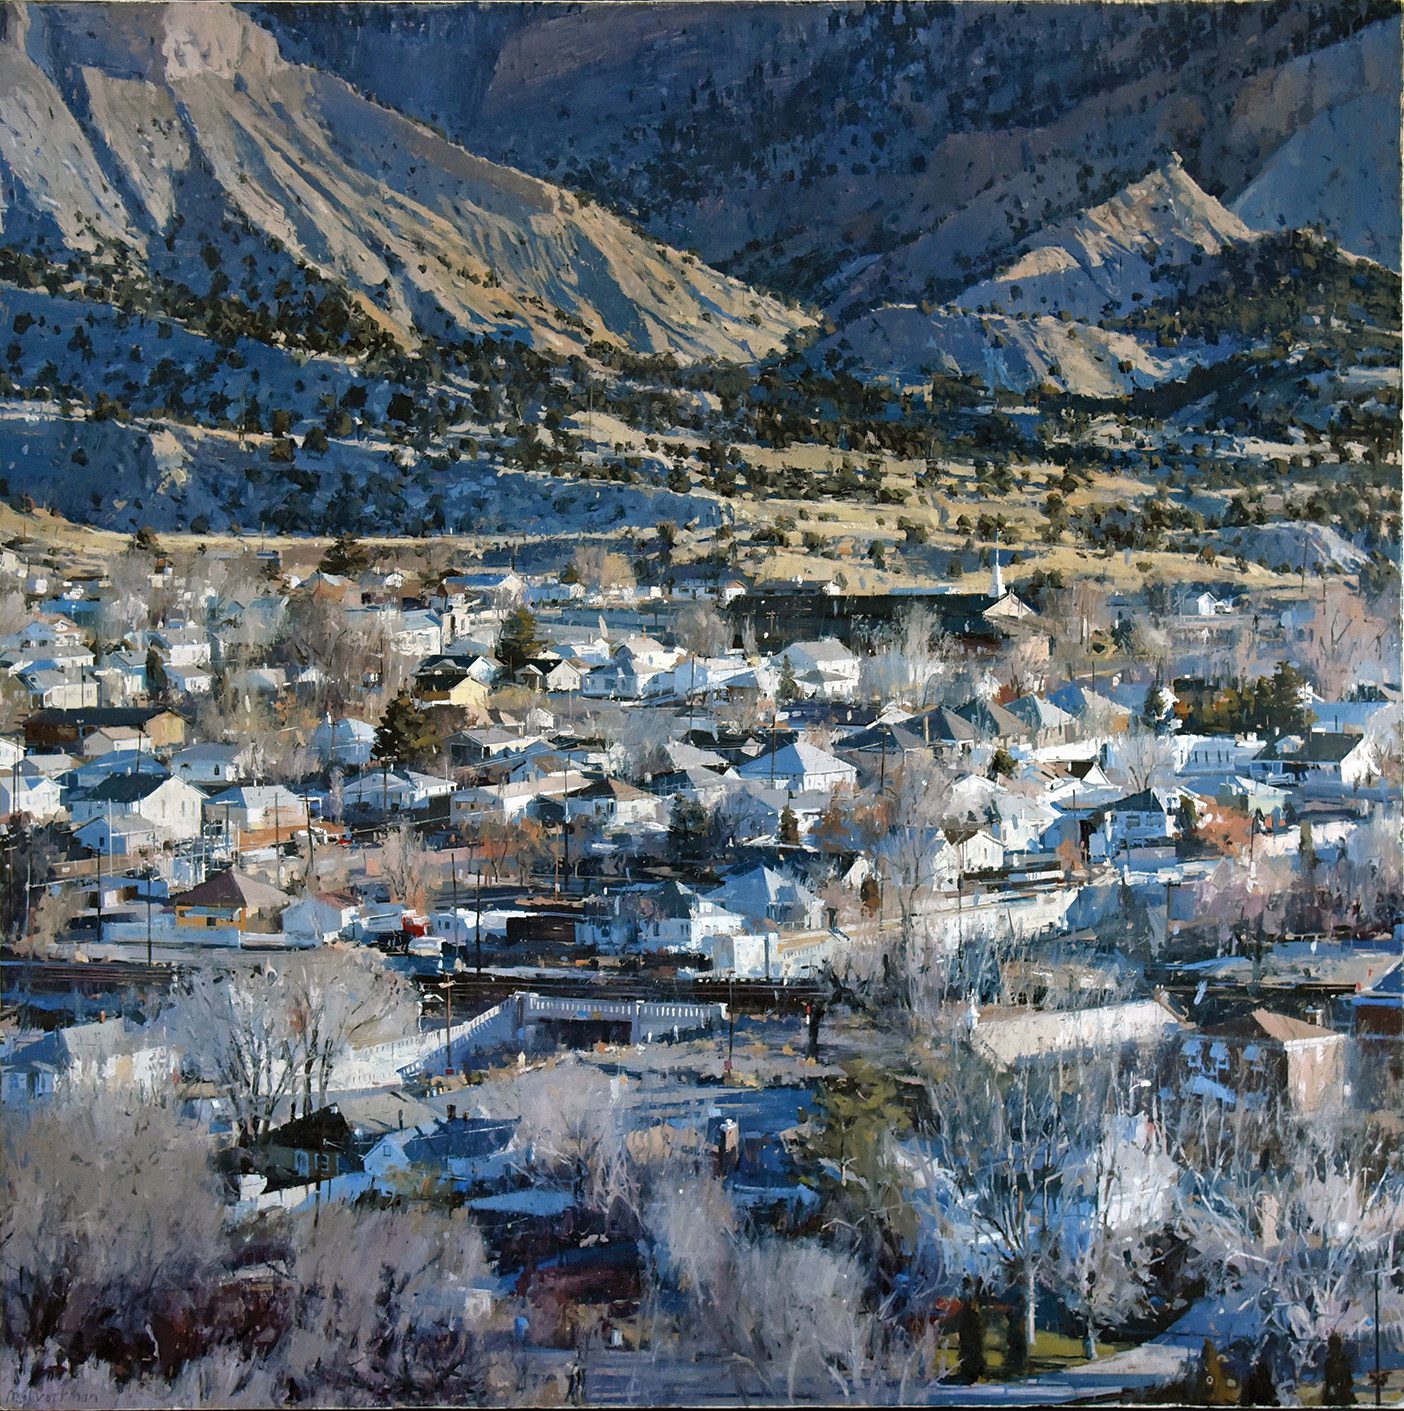 An oil painting of a Utah town that sits below the mountain. At the top half of the canvas, the mountain is a soft yellow-green covered in dark green trees. The houses, mostly white with peaked grey roofs, line the streets surrounded by wispy, dead trees.